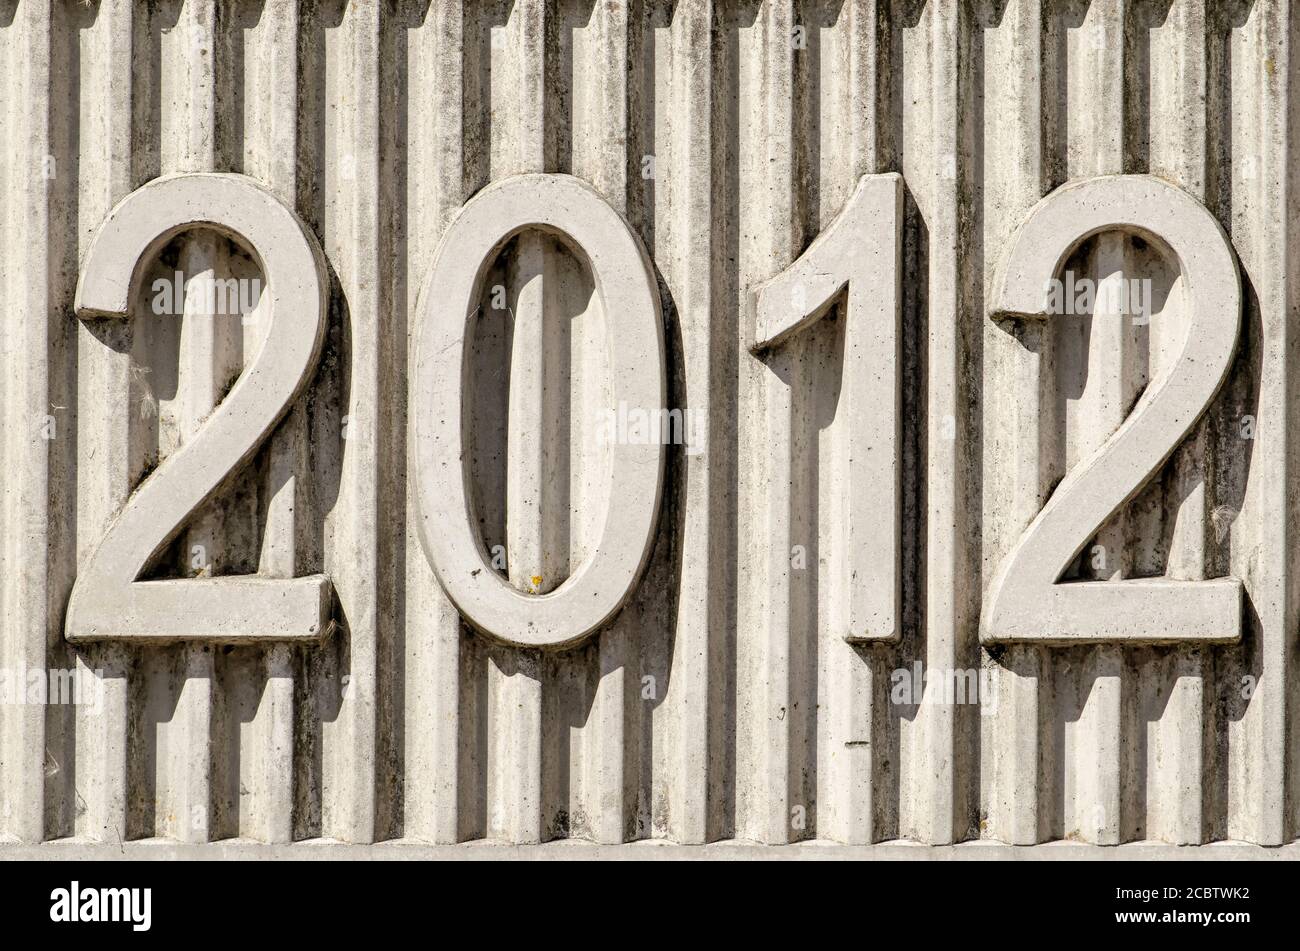 Concrete date-stone with a relief of vertical lines and the year 2012 Stock Photo